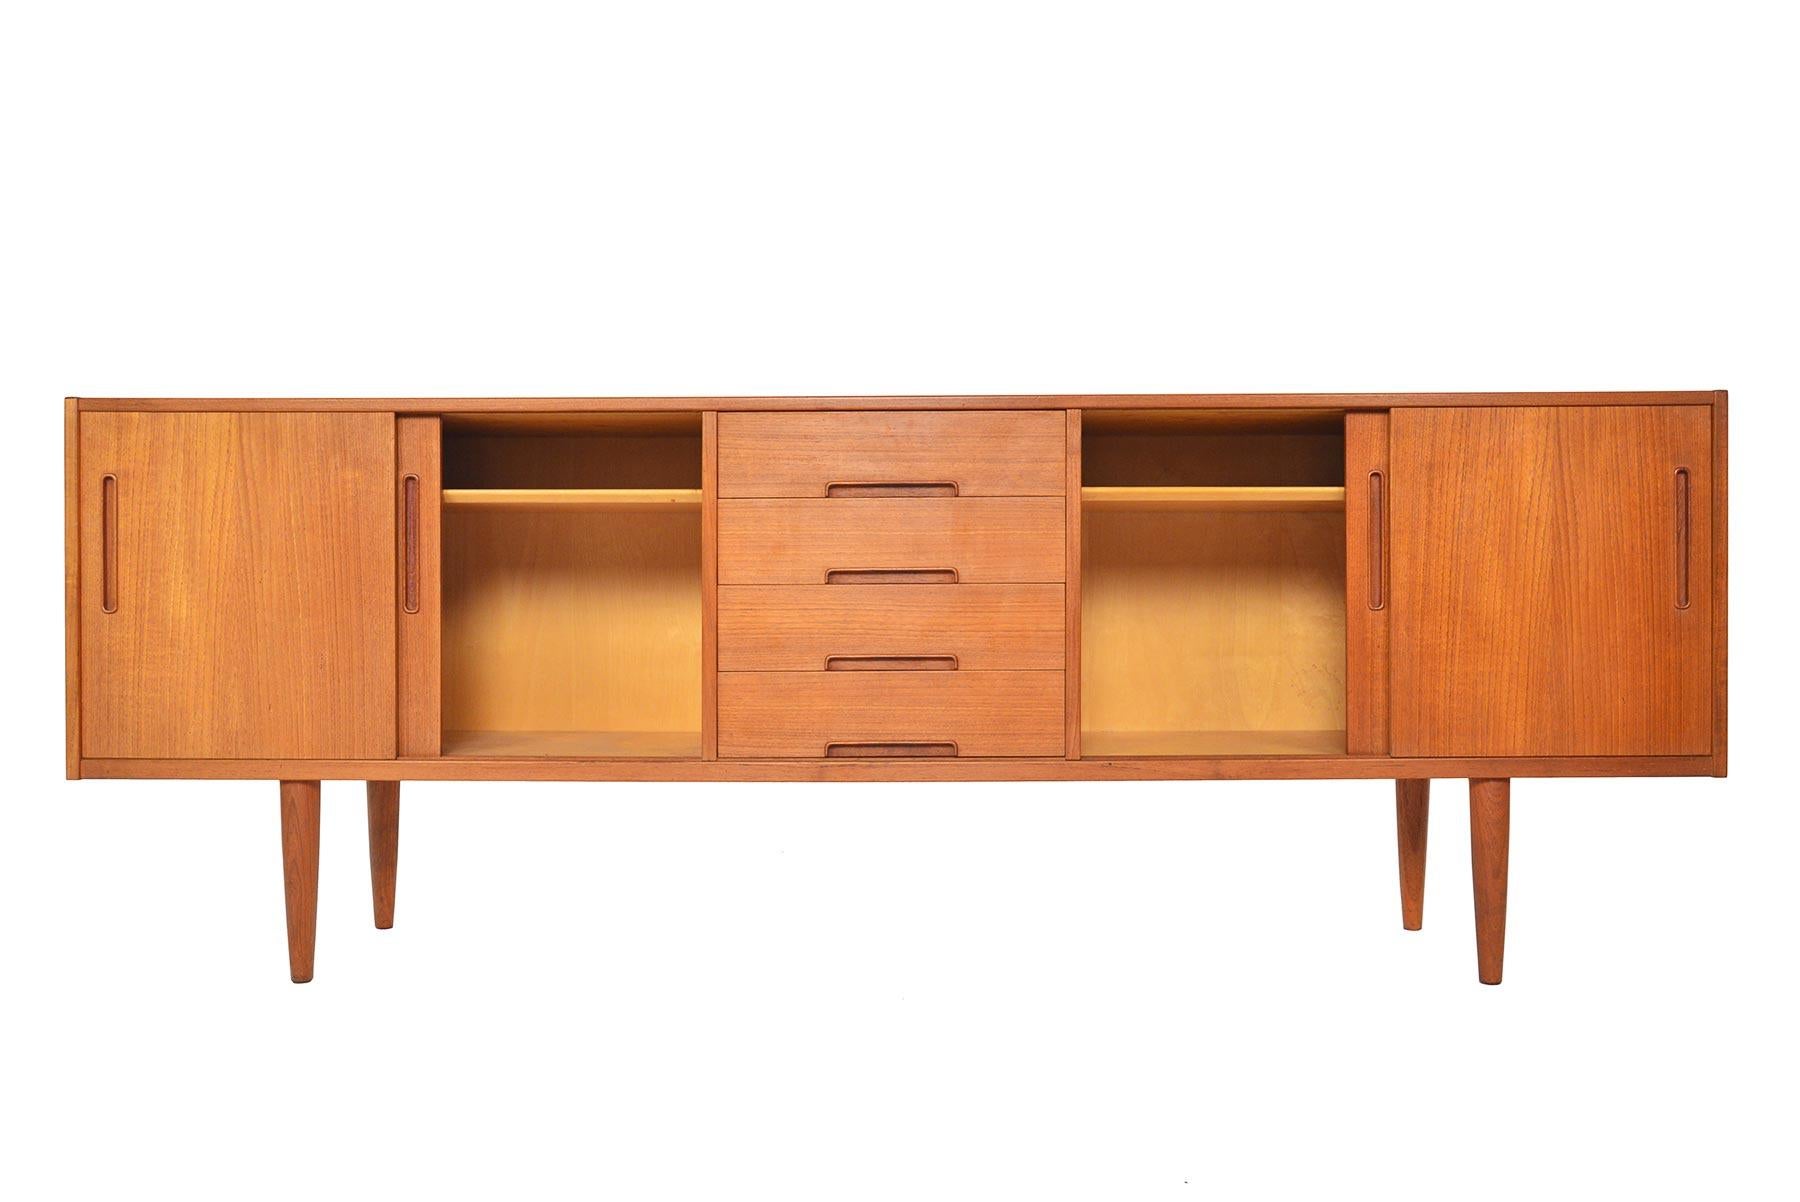 This breathtaking Swedish modern midcentury teak Gigante credenza was designed by Nils Jonsson and manufactured by Troeds in the 1960s. The perfect scale for any dining or living room, this piece will make a wonderful addition to your modern home.